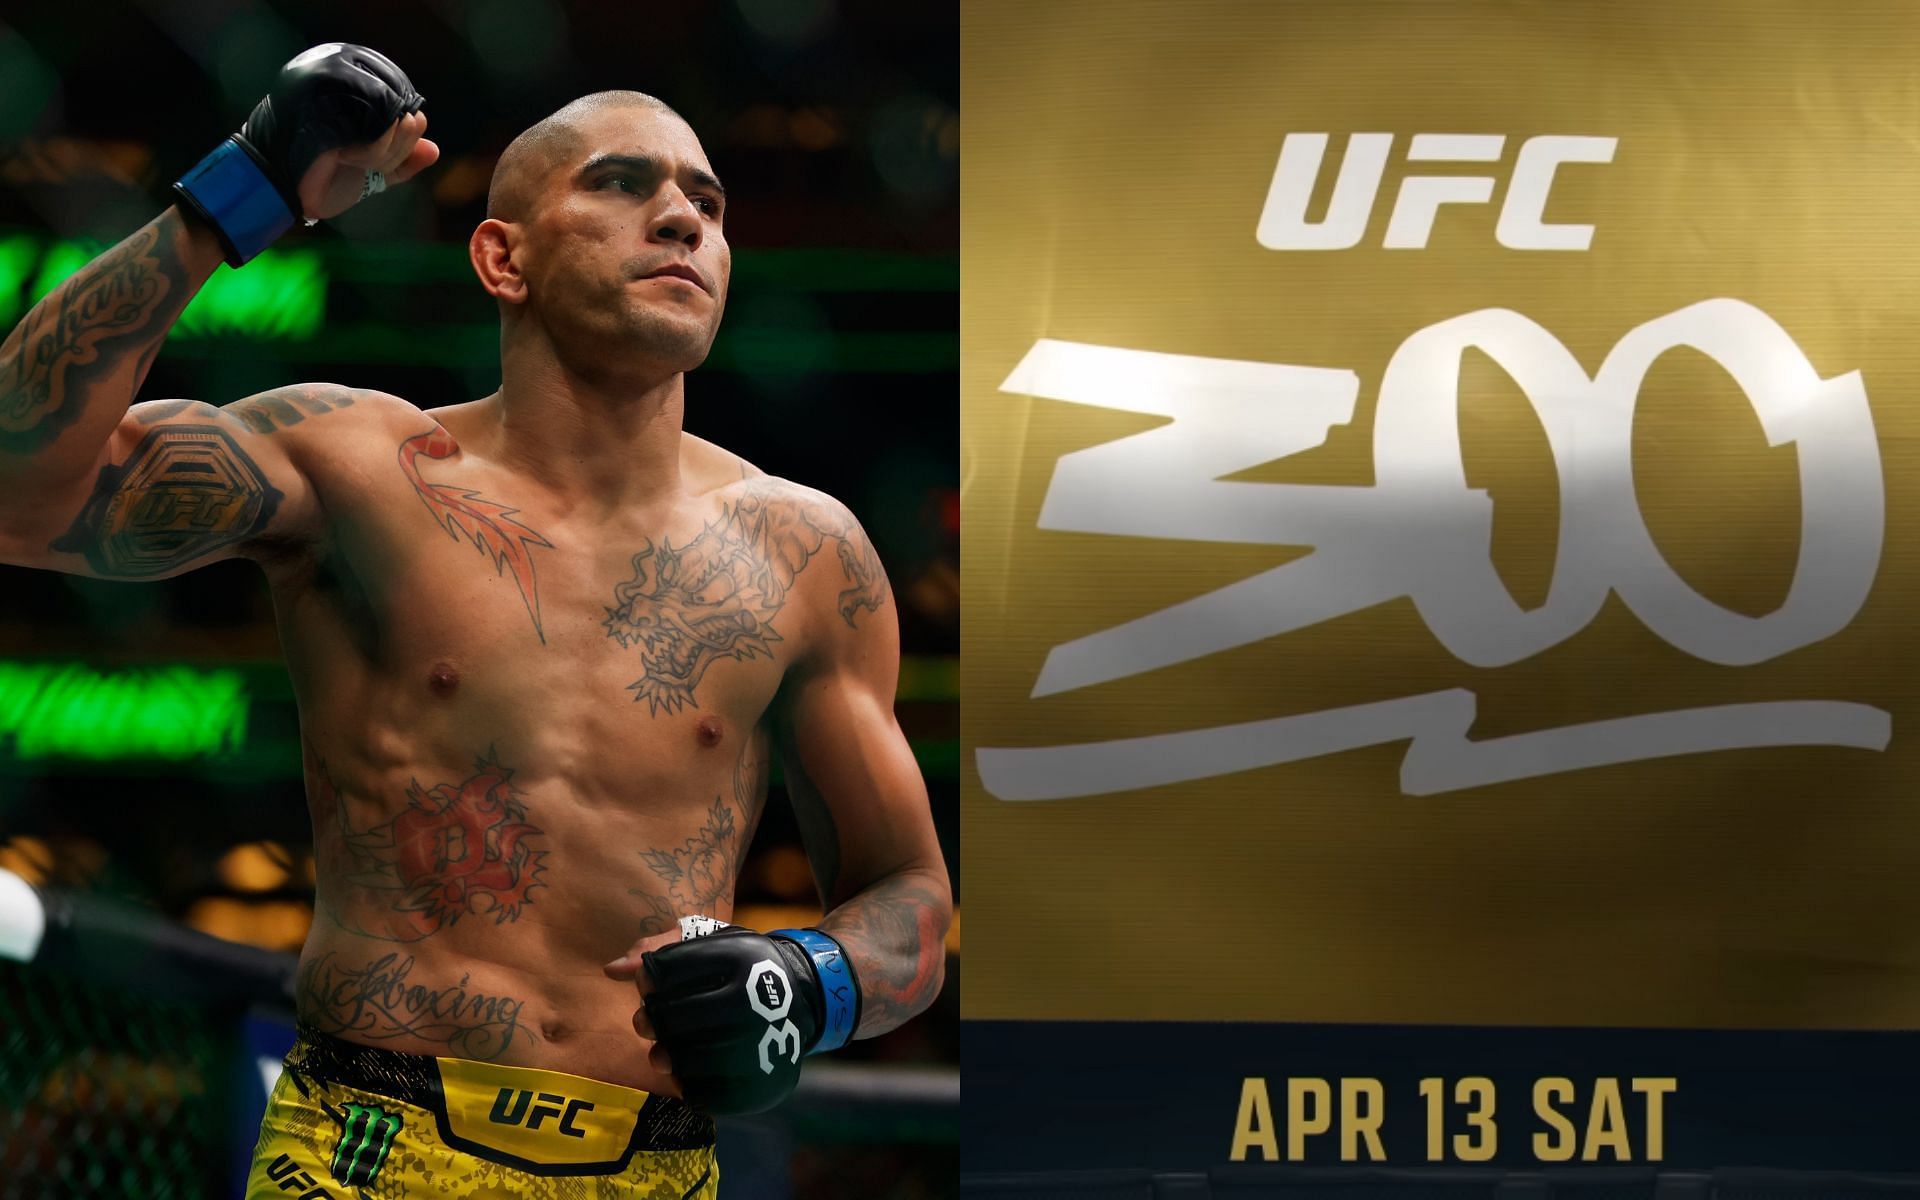 UFC light heavyweight champion Alex Pereira will compete in the main event of UFC 300 [Images courtesy: Getty Images and UFC on YouTube]